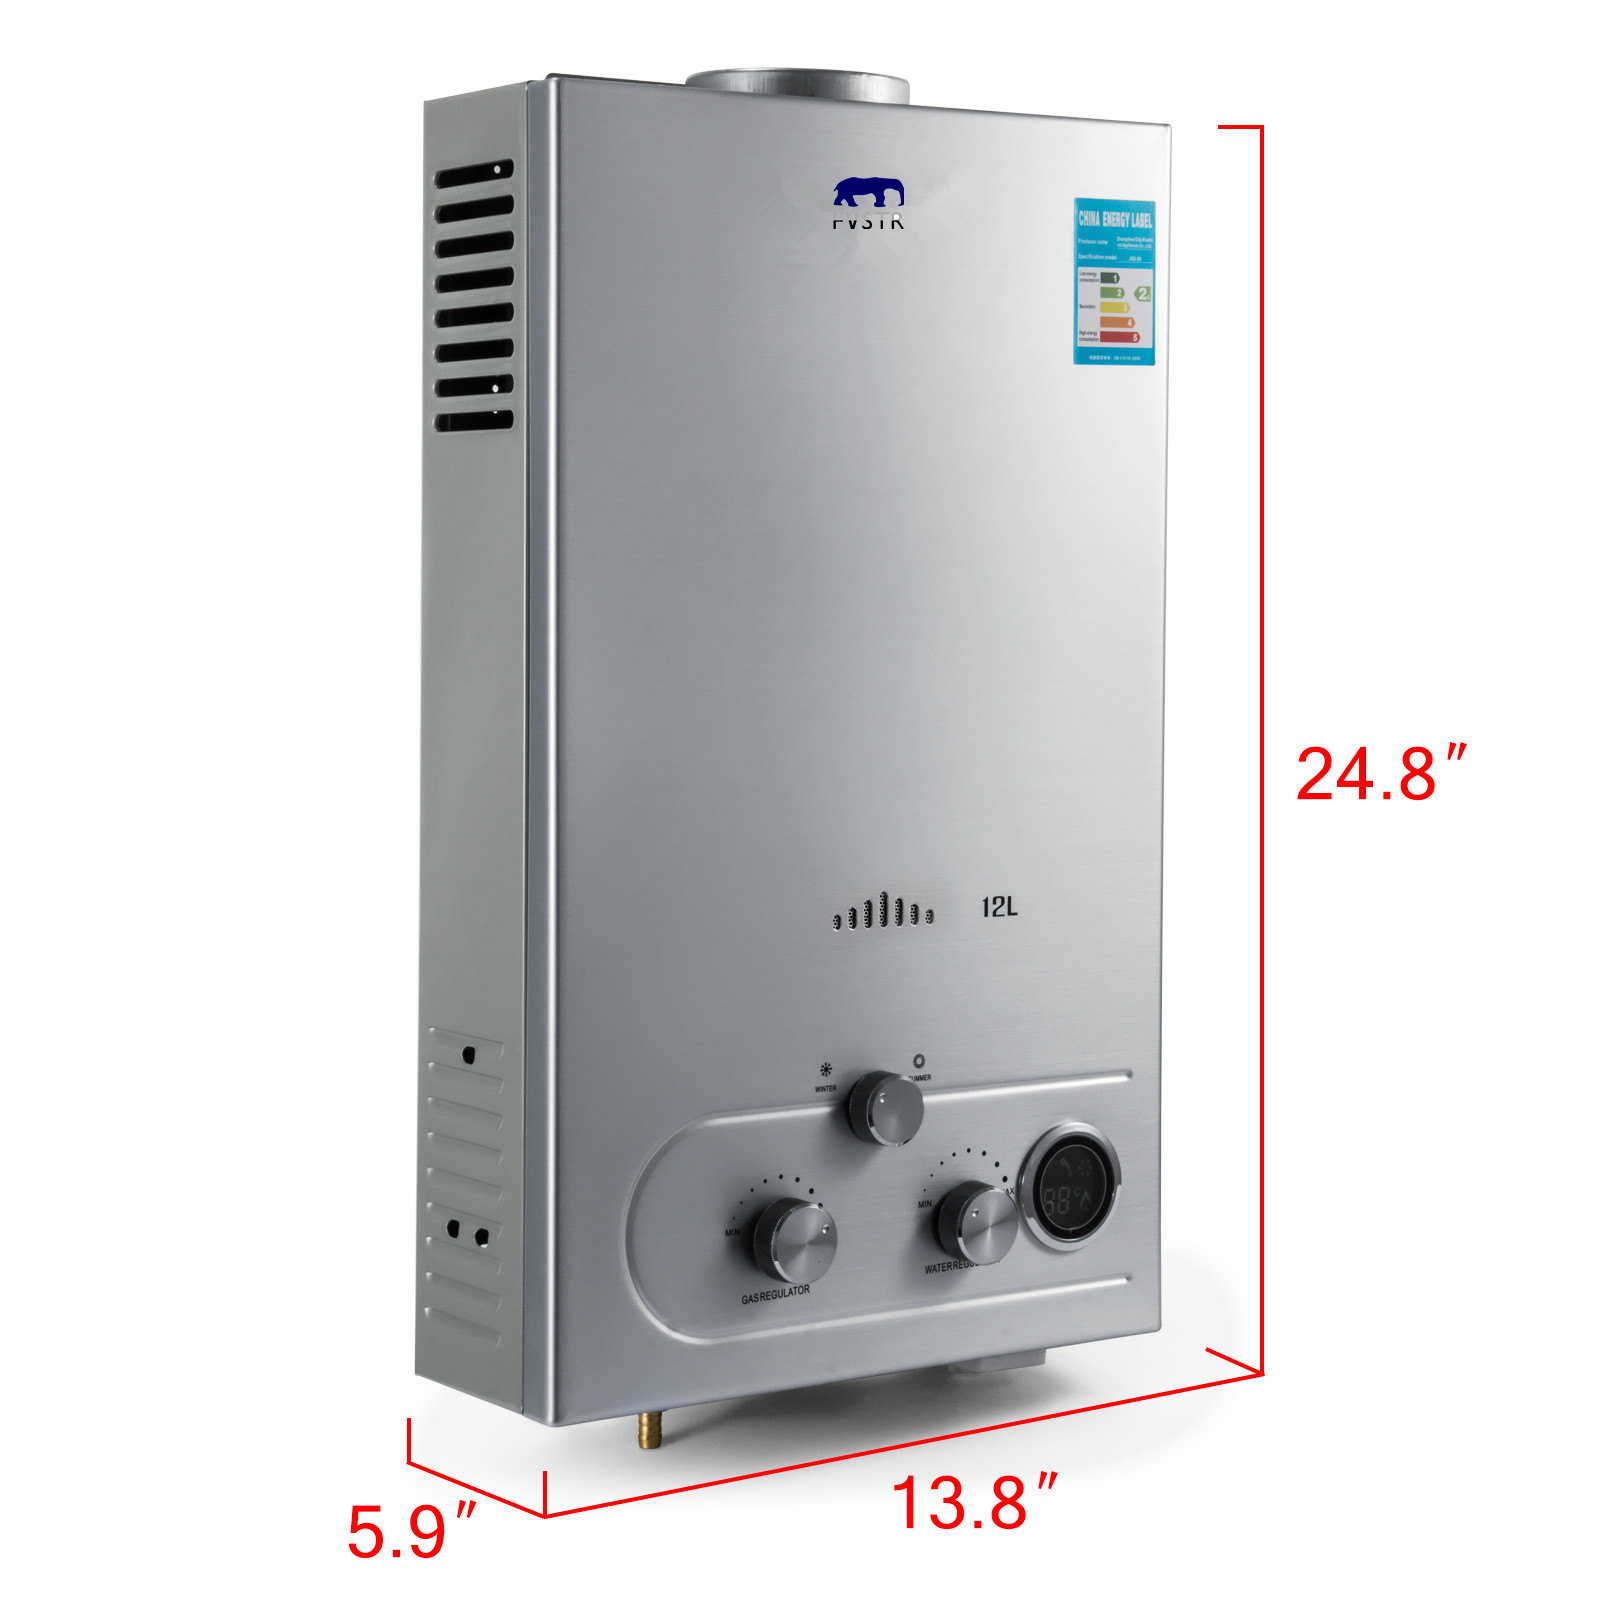 Fast Shipping! 12L LPG GAS Hot Water Heater Propane Tankless Instant Boiler Stainless Steel CE